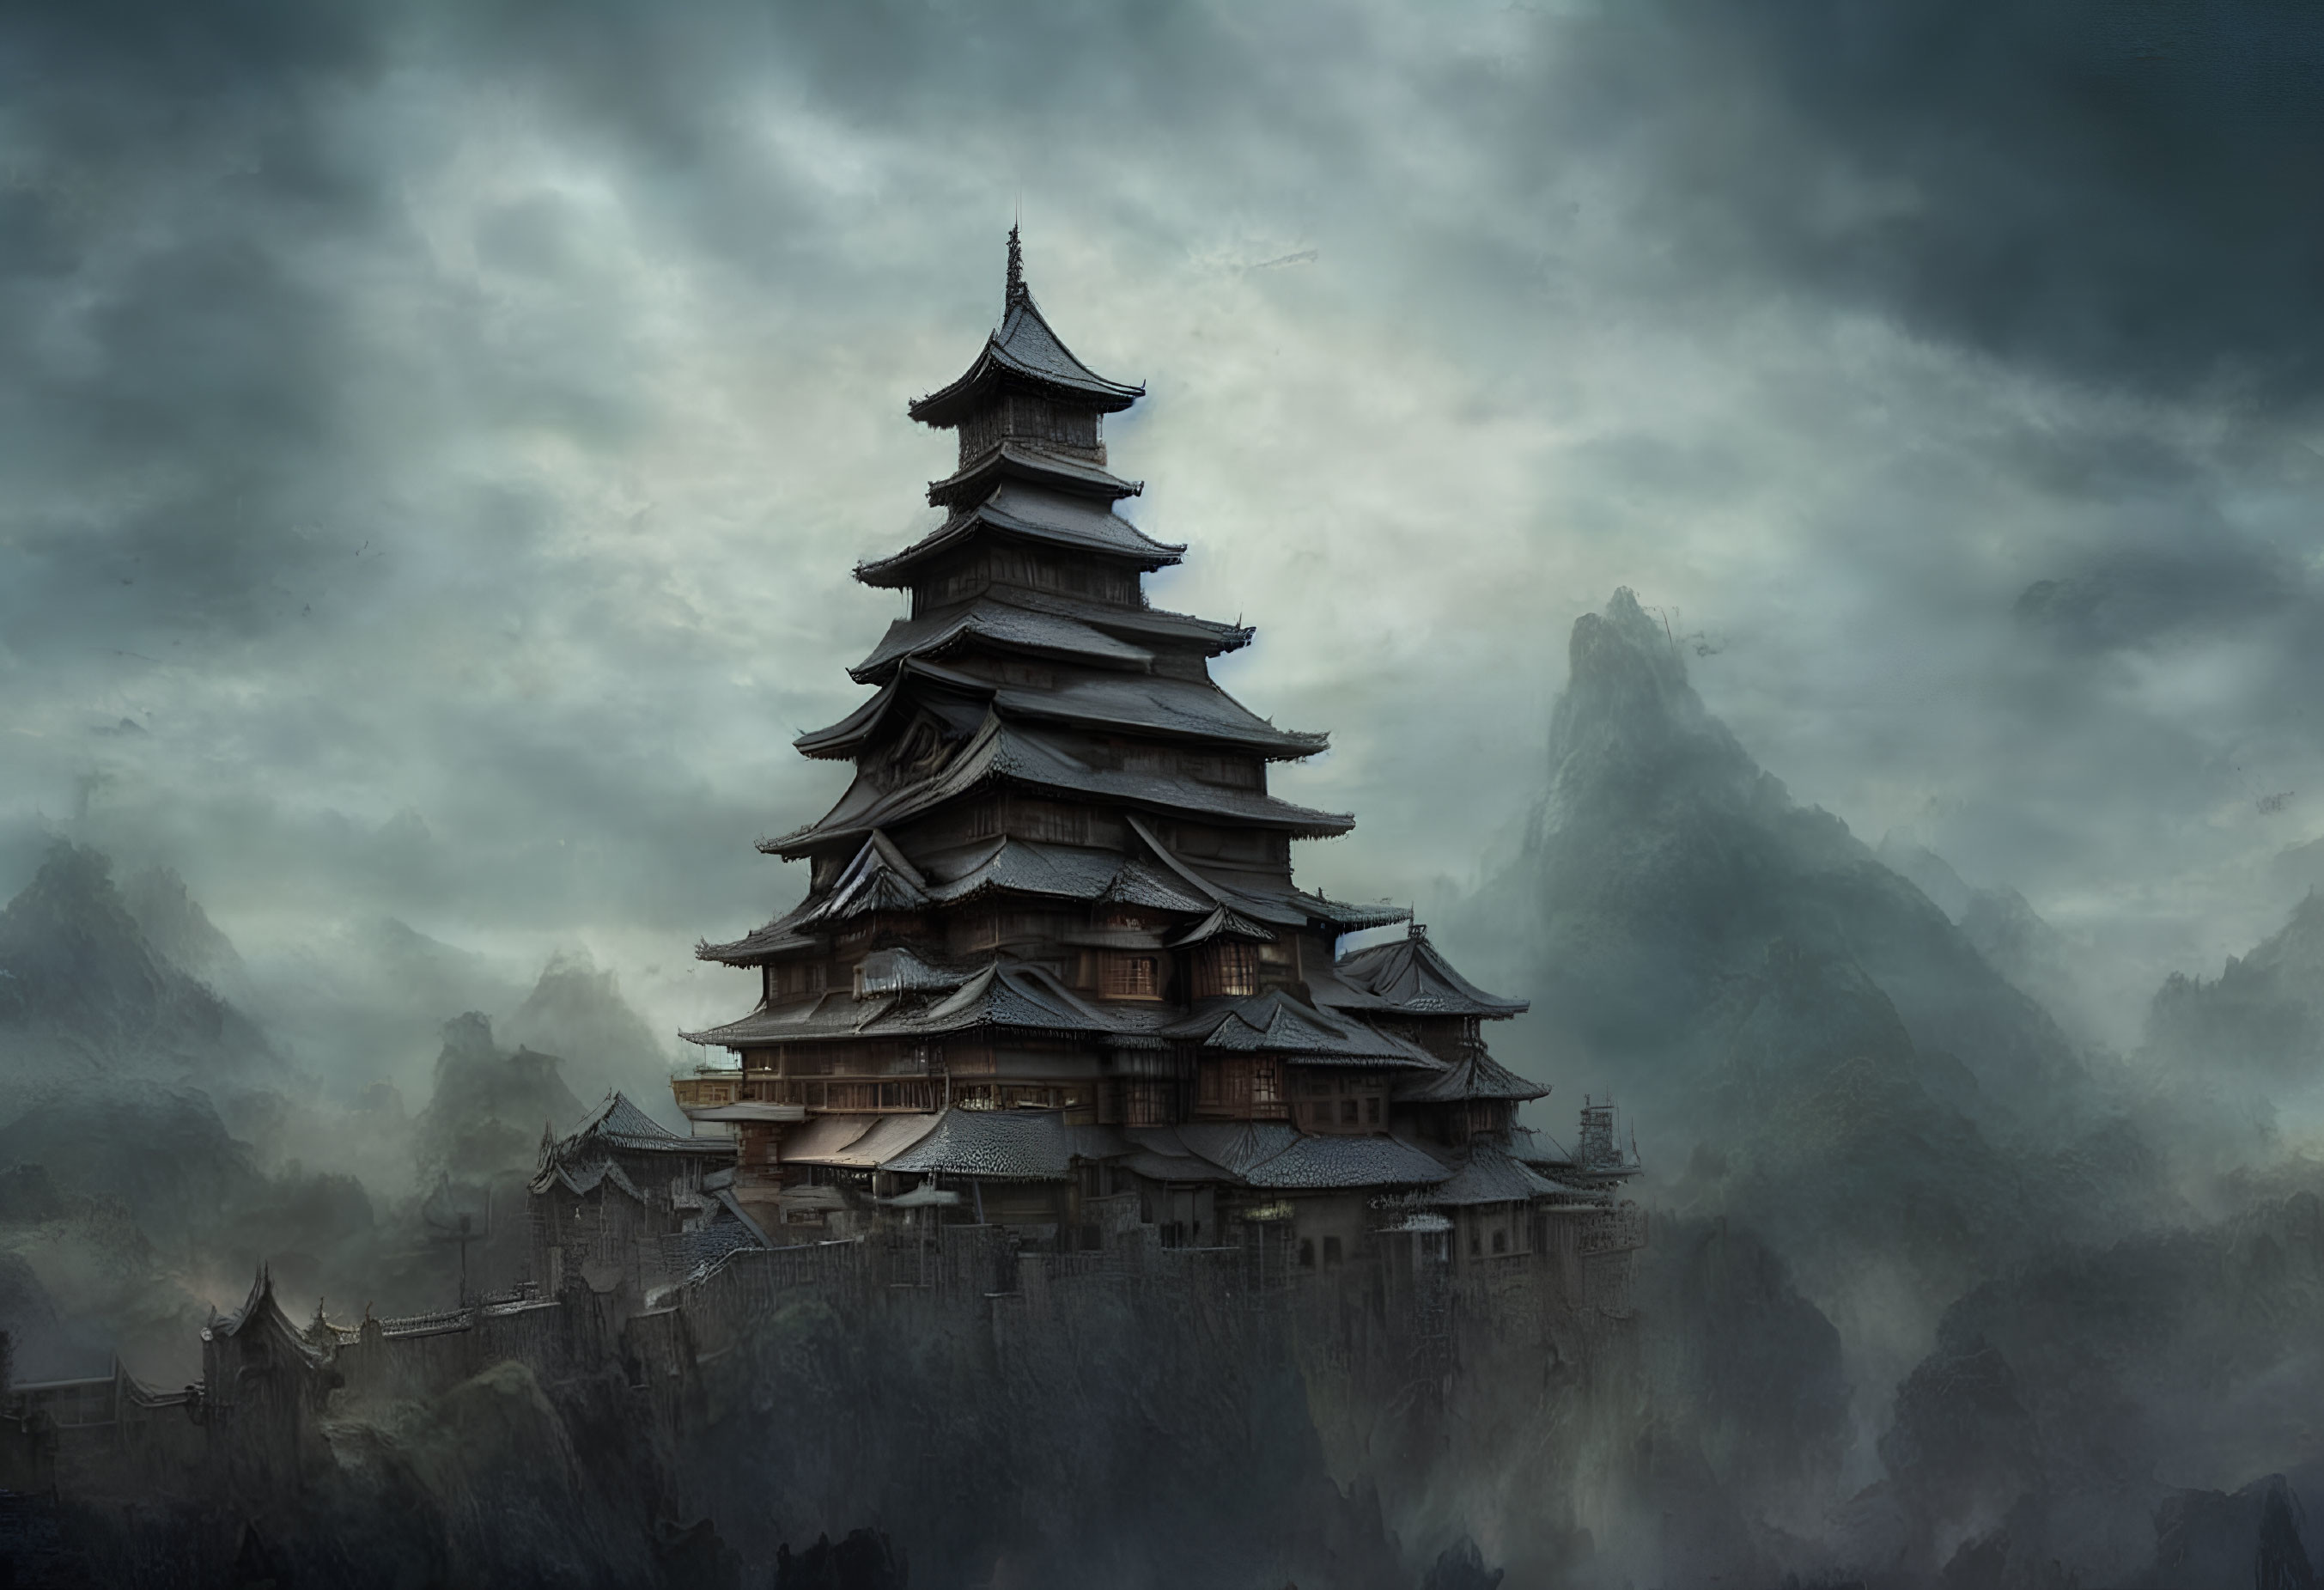 Ancient pagoda in misty mountains under dramatic sky